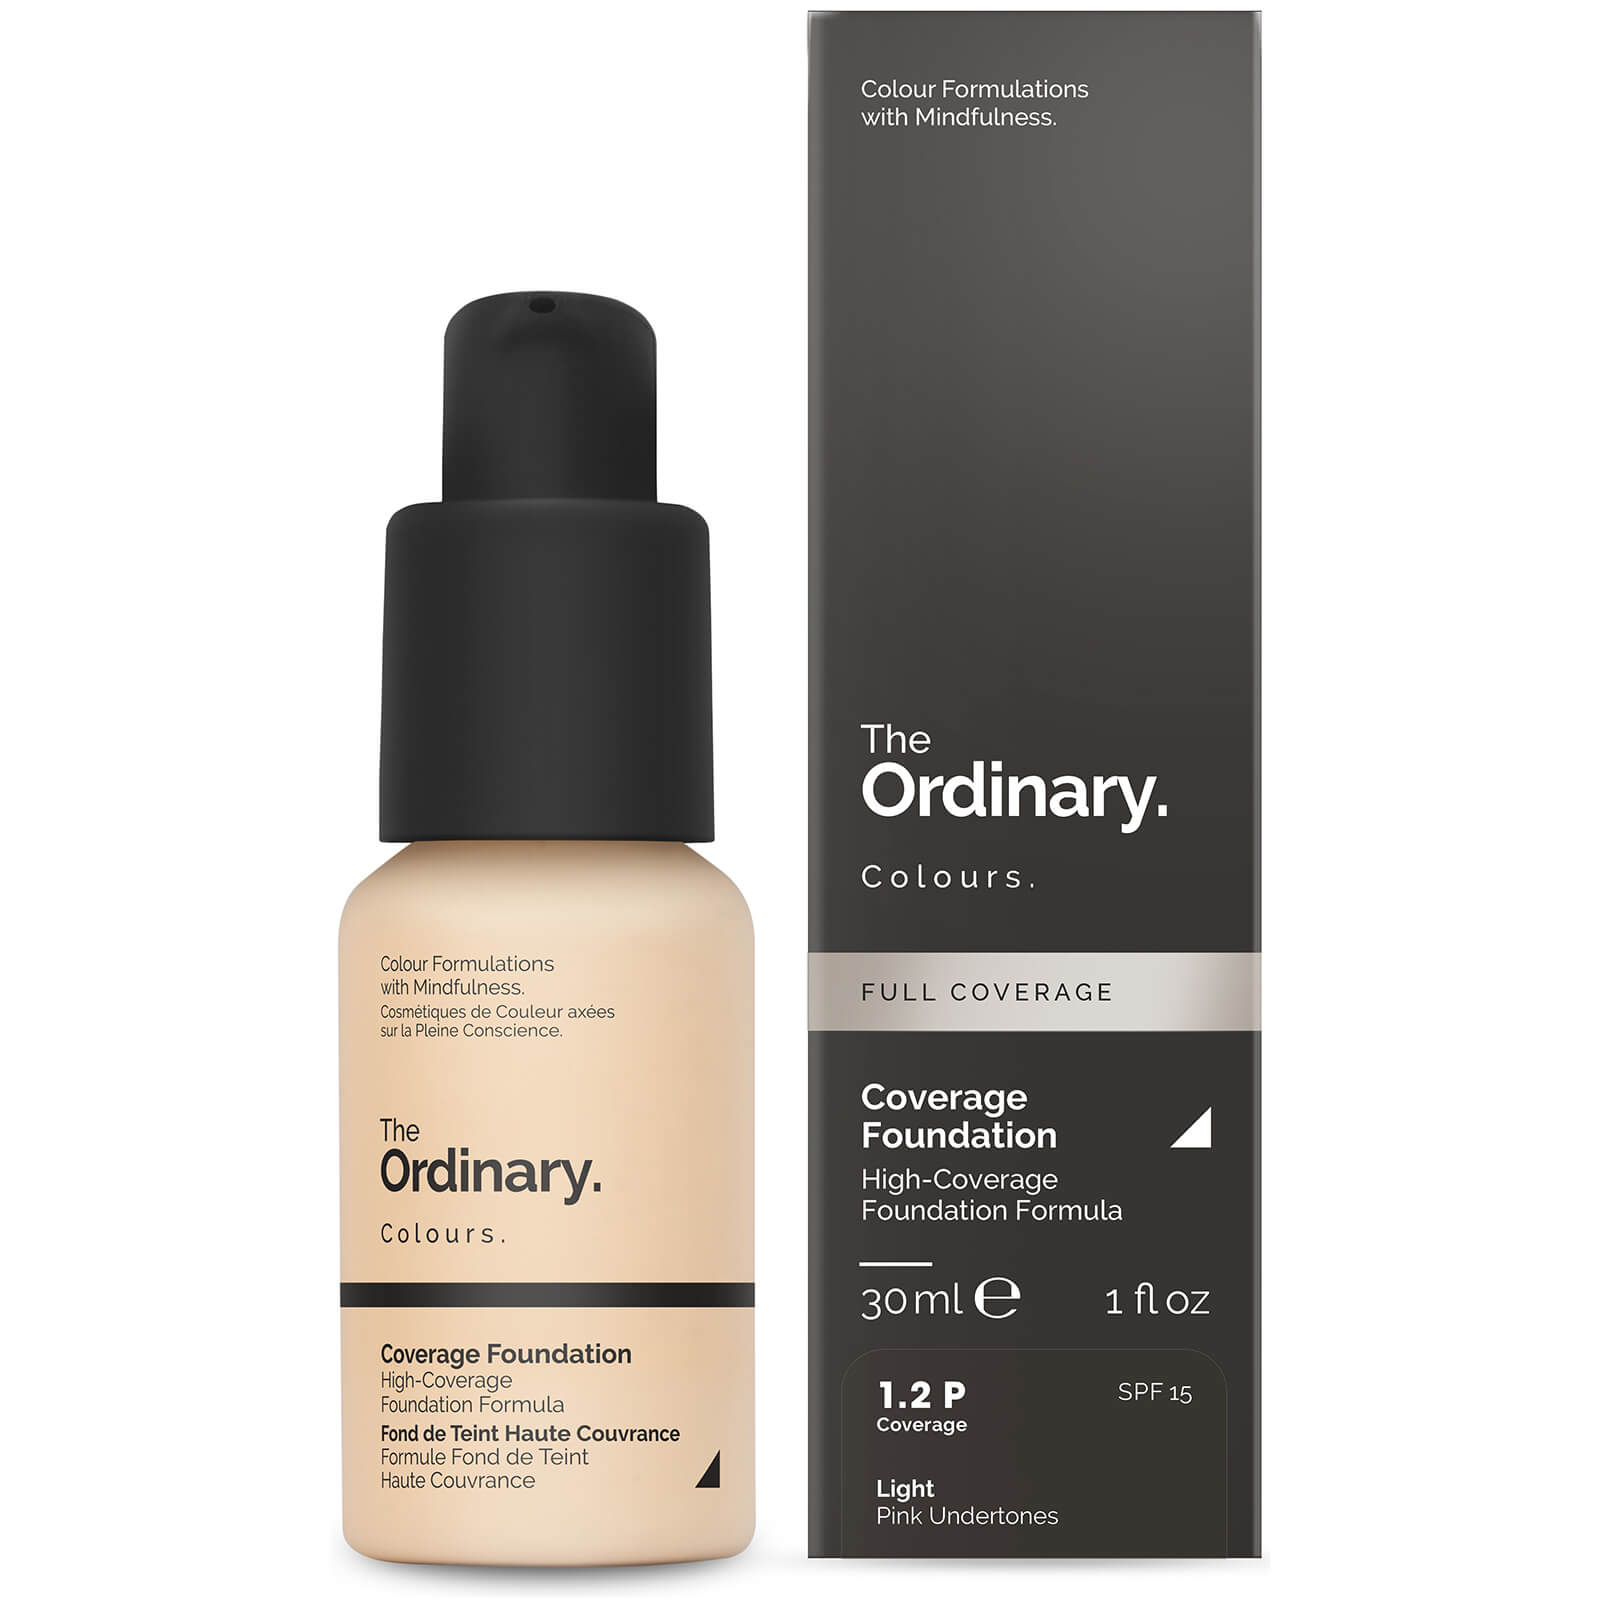 The Ordinary Coverage Foundation with SPF 15 by The Ordinary Colours 30ml (Various Shades) - 1.2P